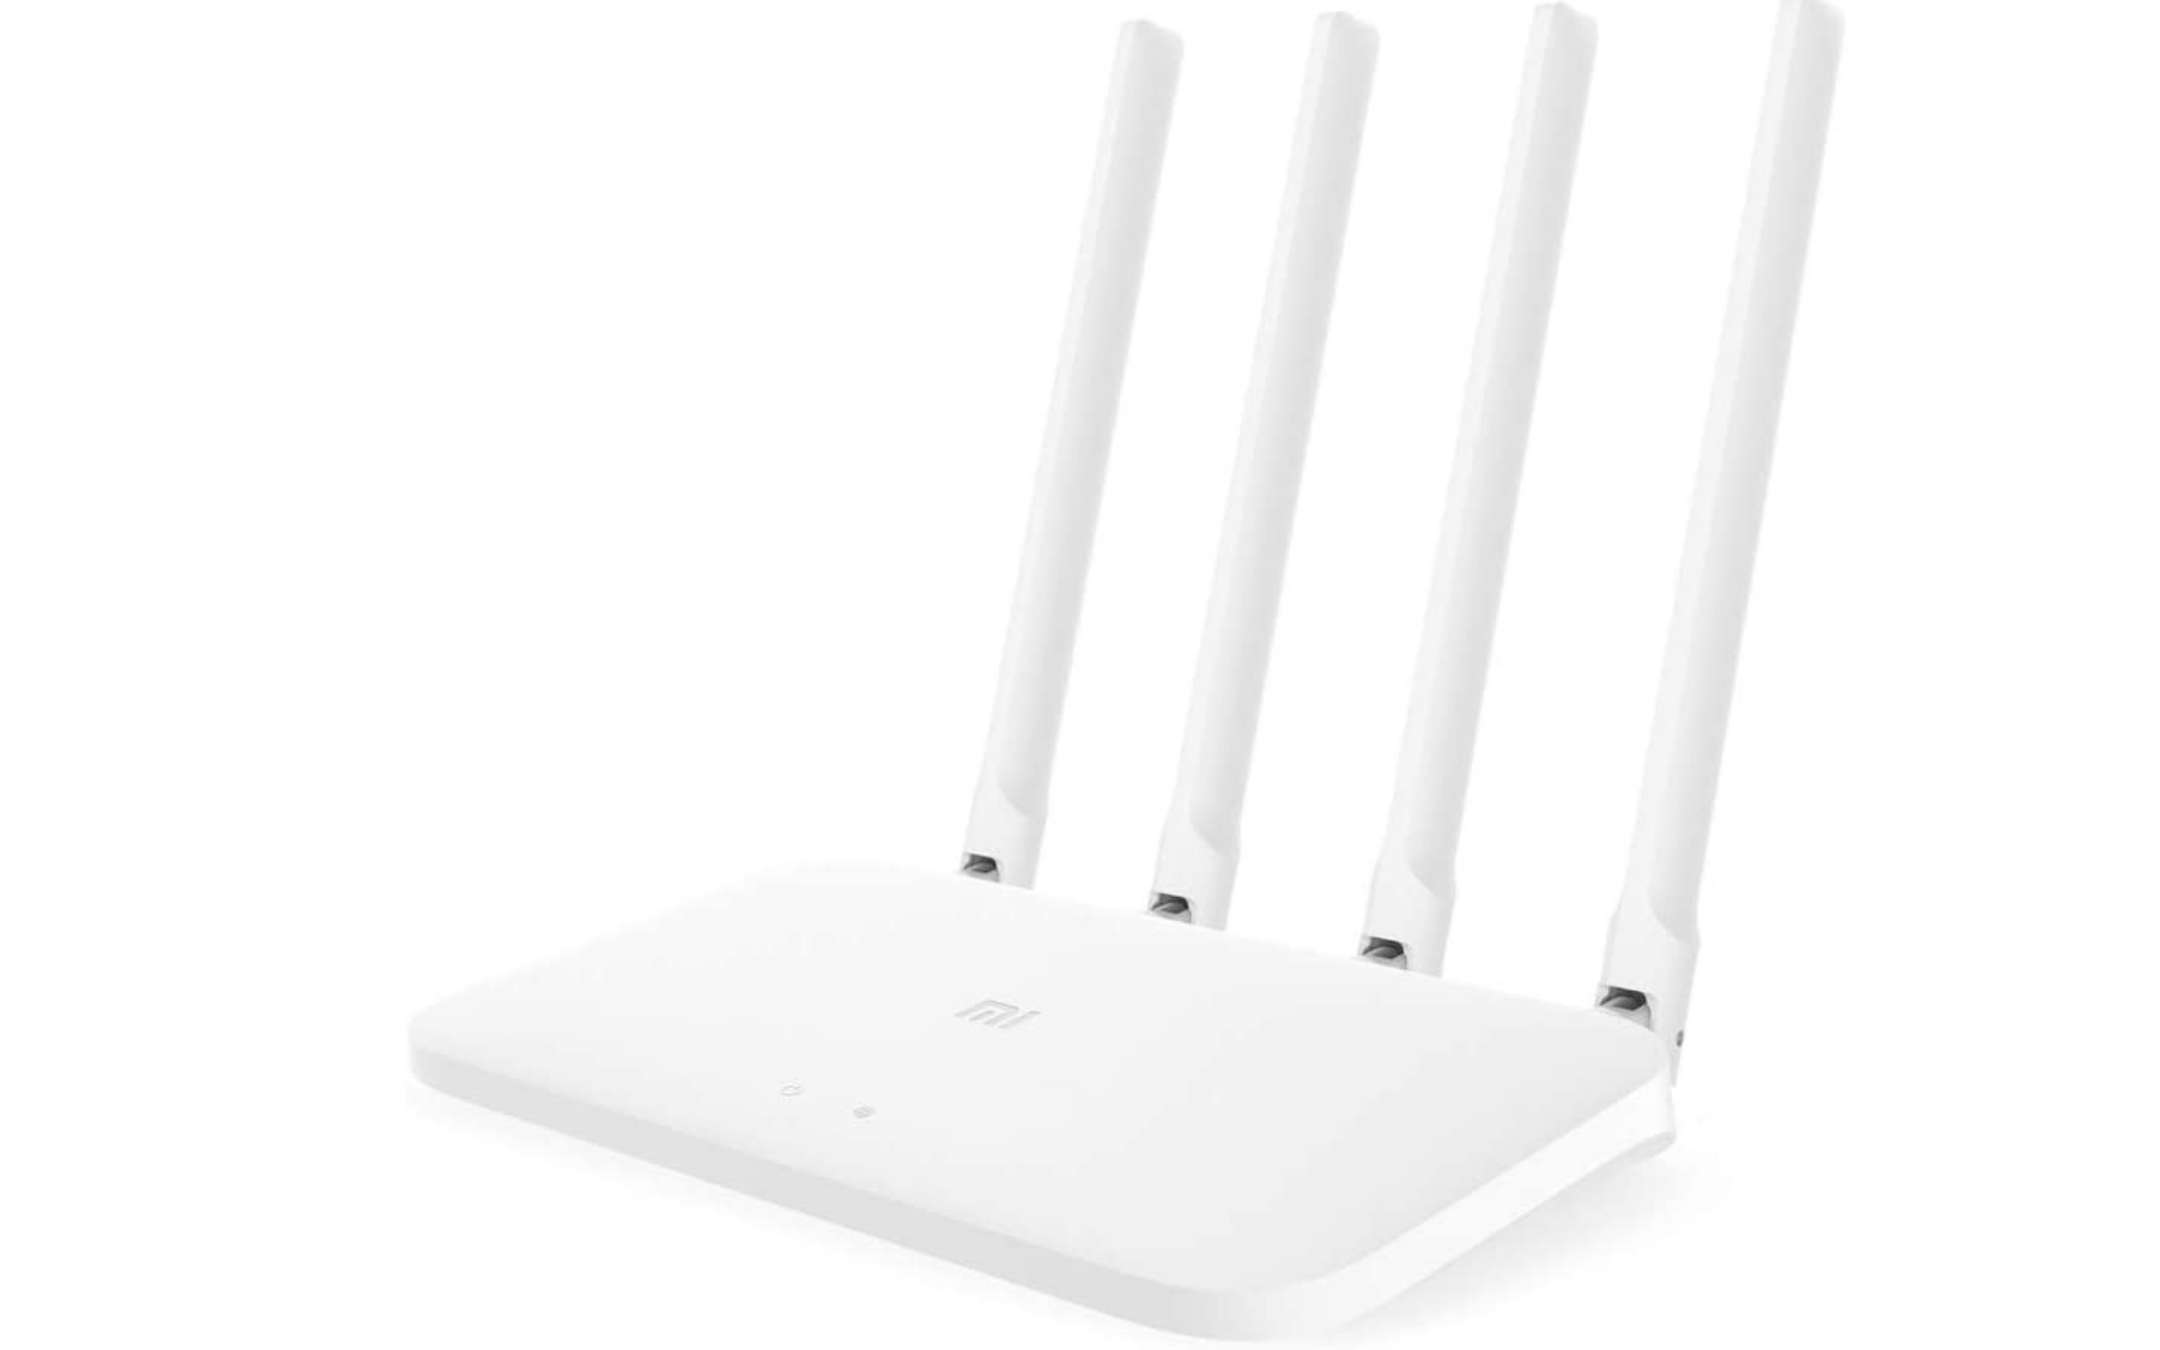 Xiaomi Mi Router 4A Ac1200 for only € 18.90 on Amazon